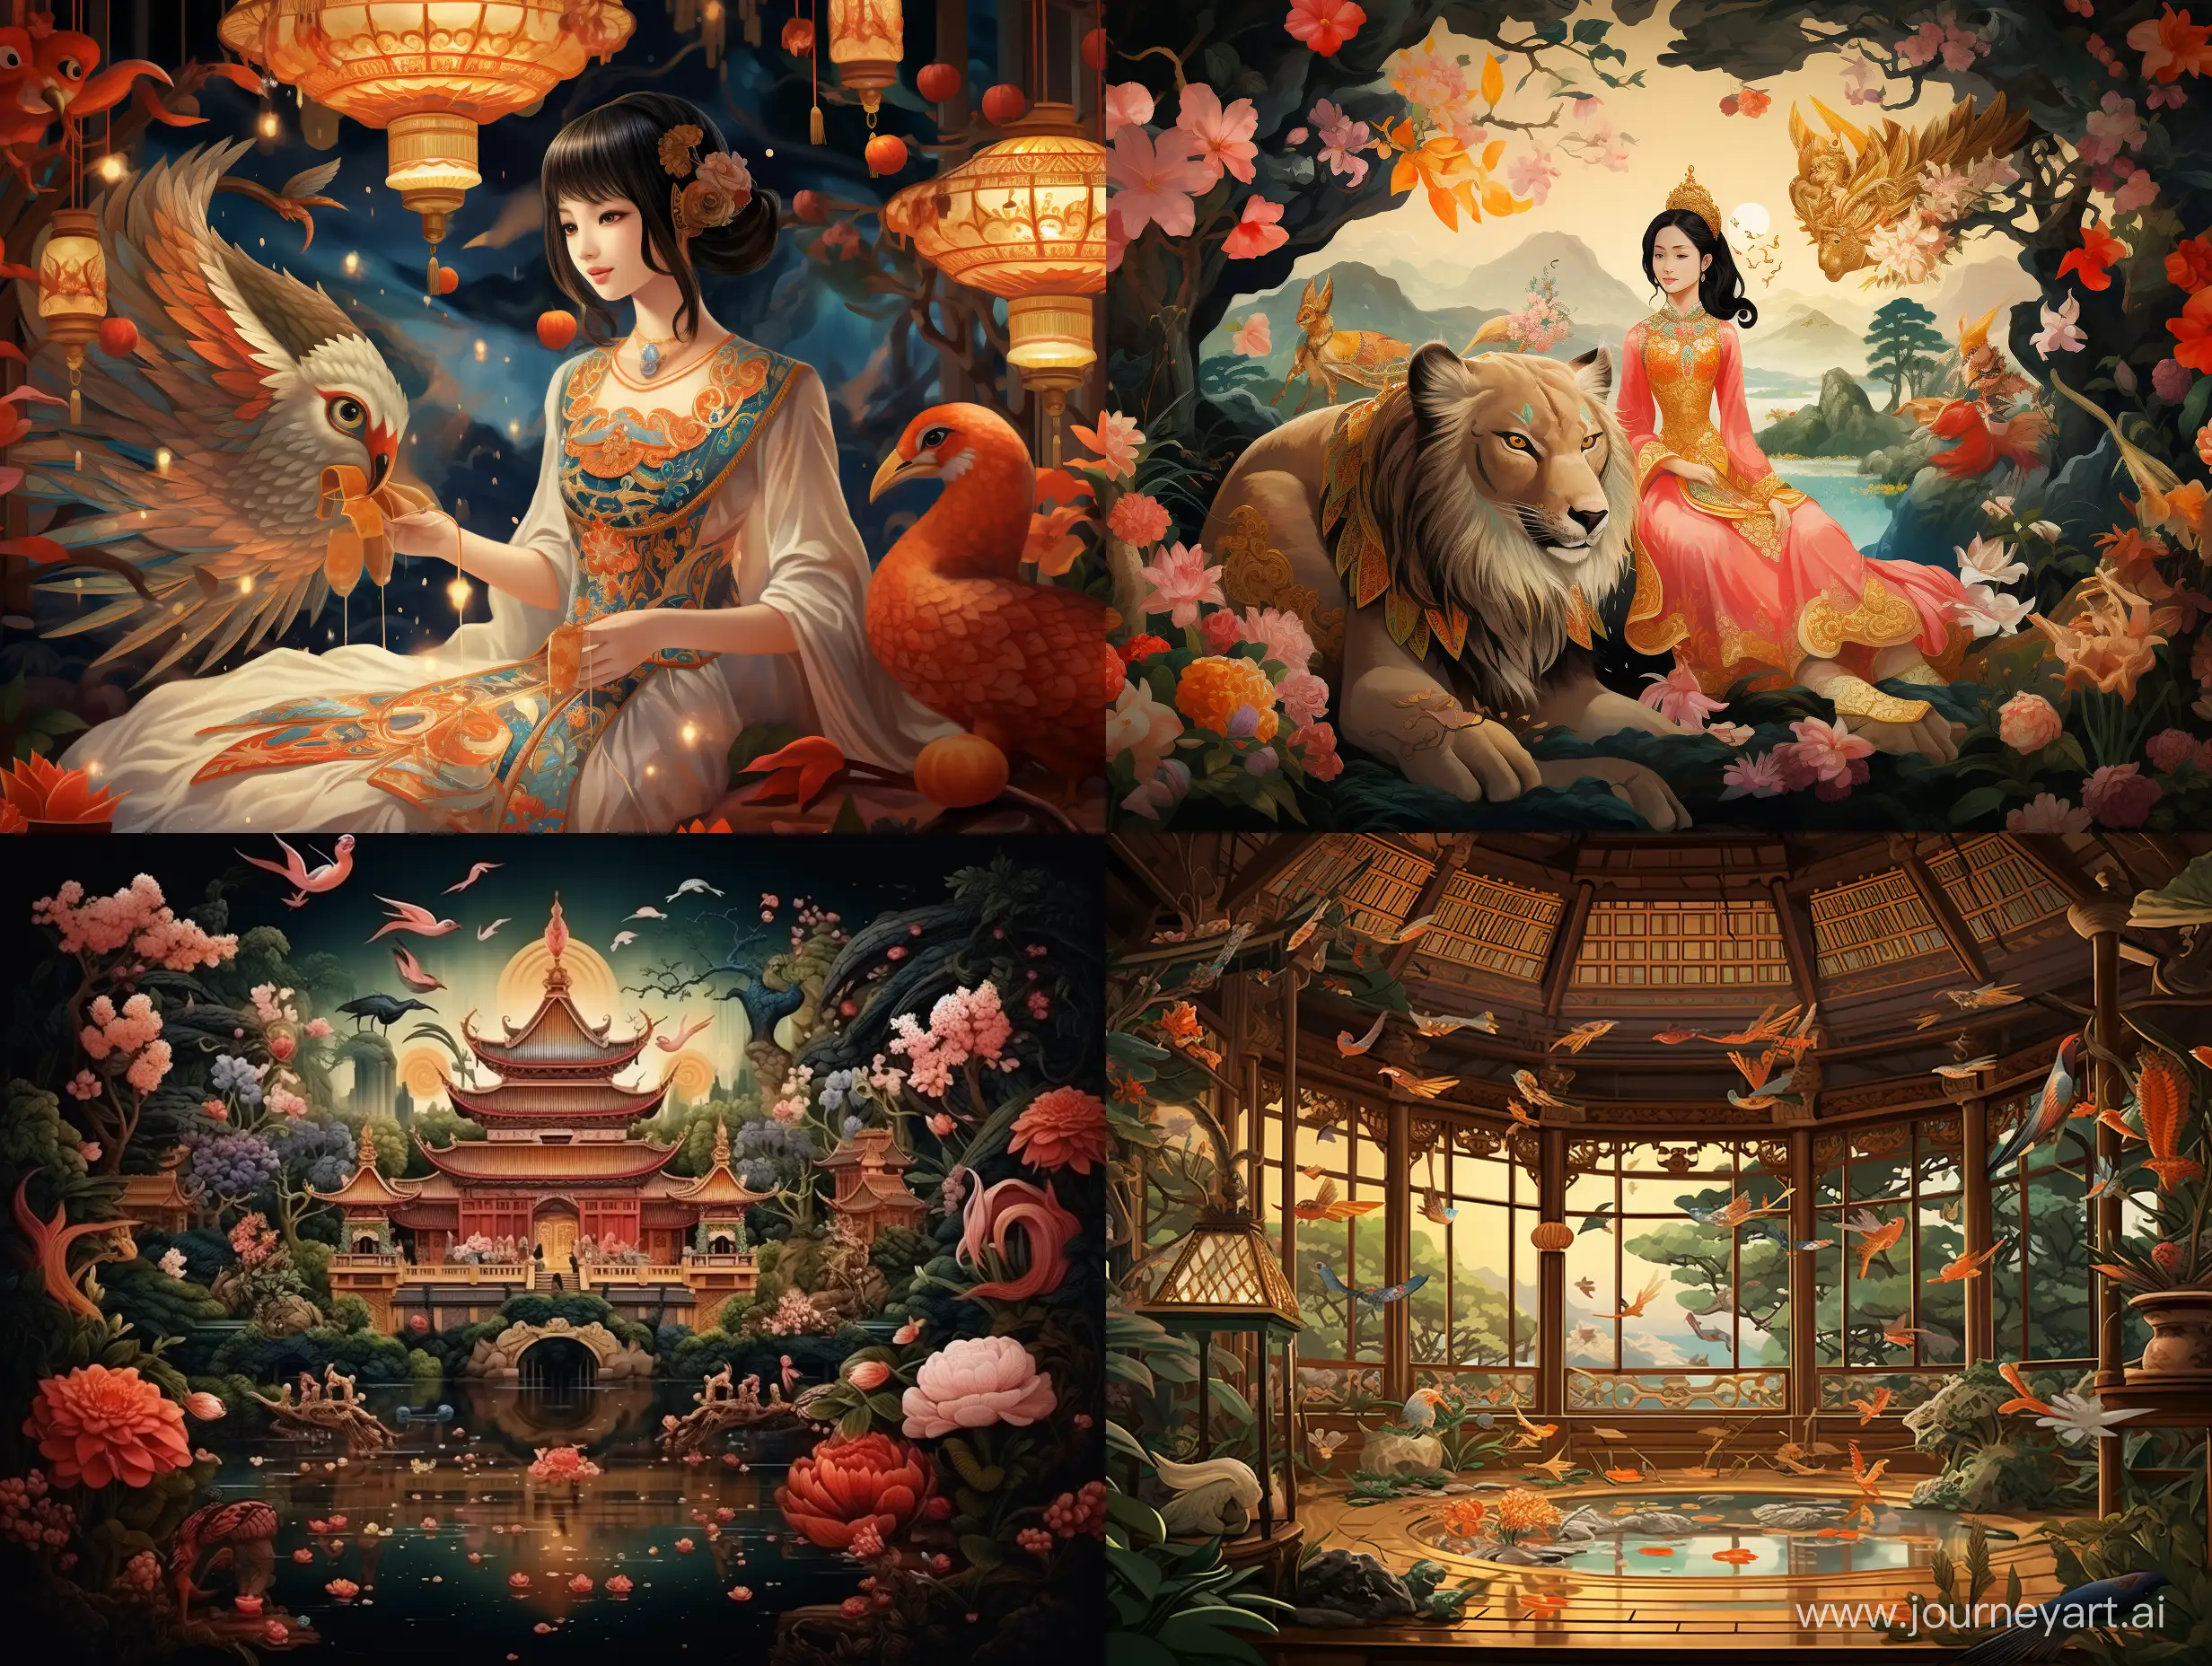 Illustration like a fairytale of the animals from Chinese calendar in Thai palace